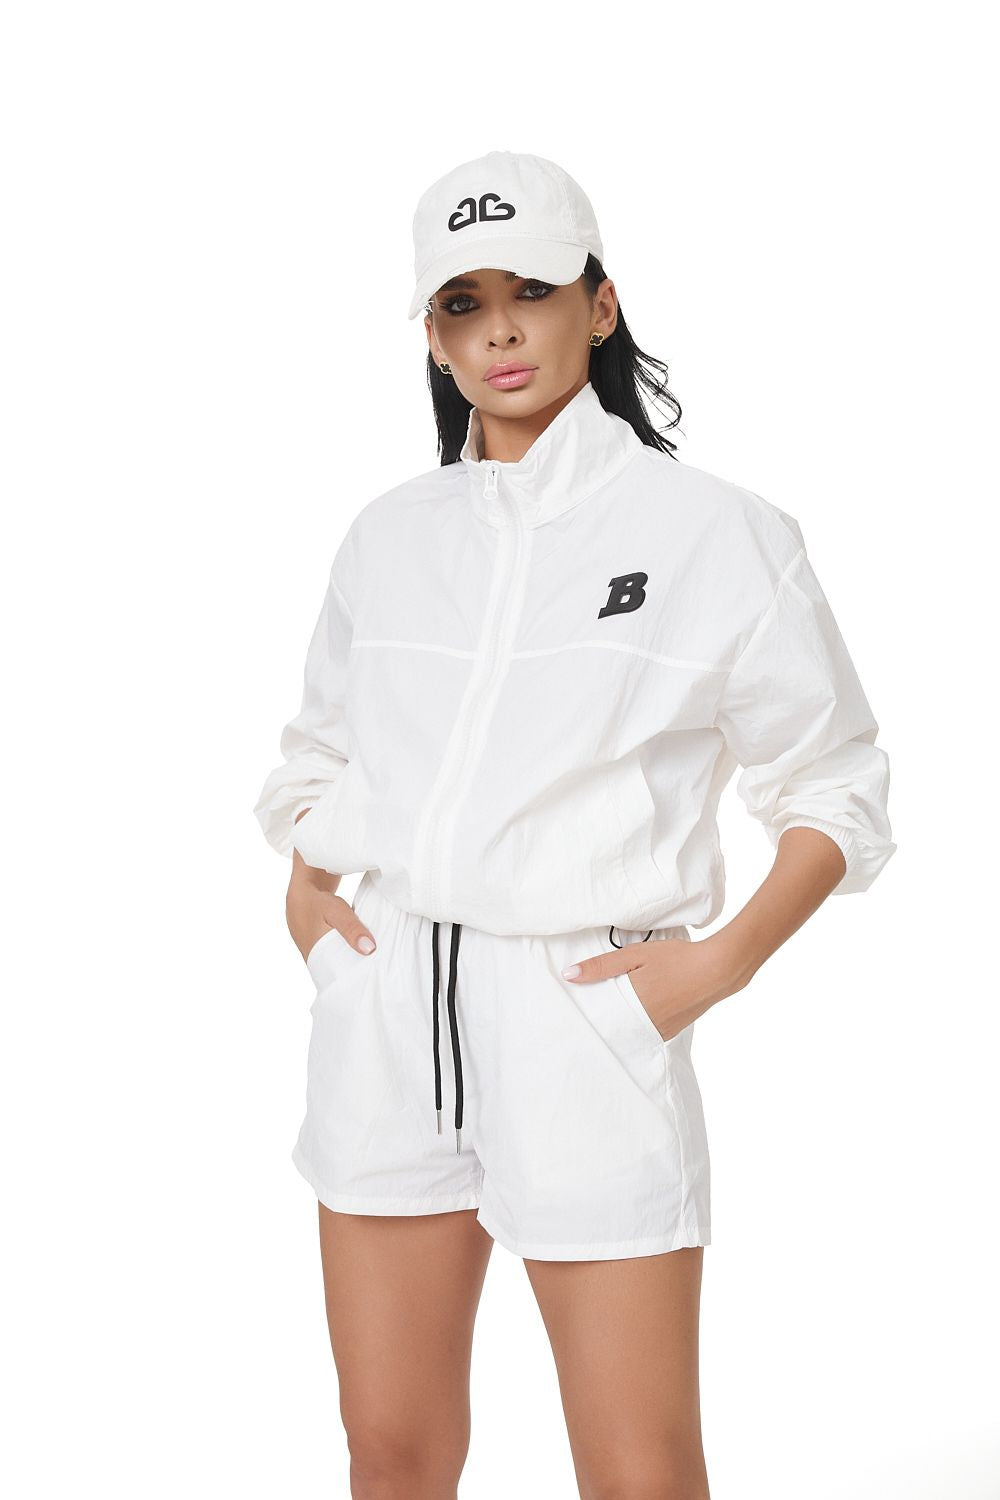 White casual women's training suit by Teryl Bogas